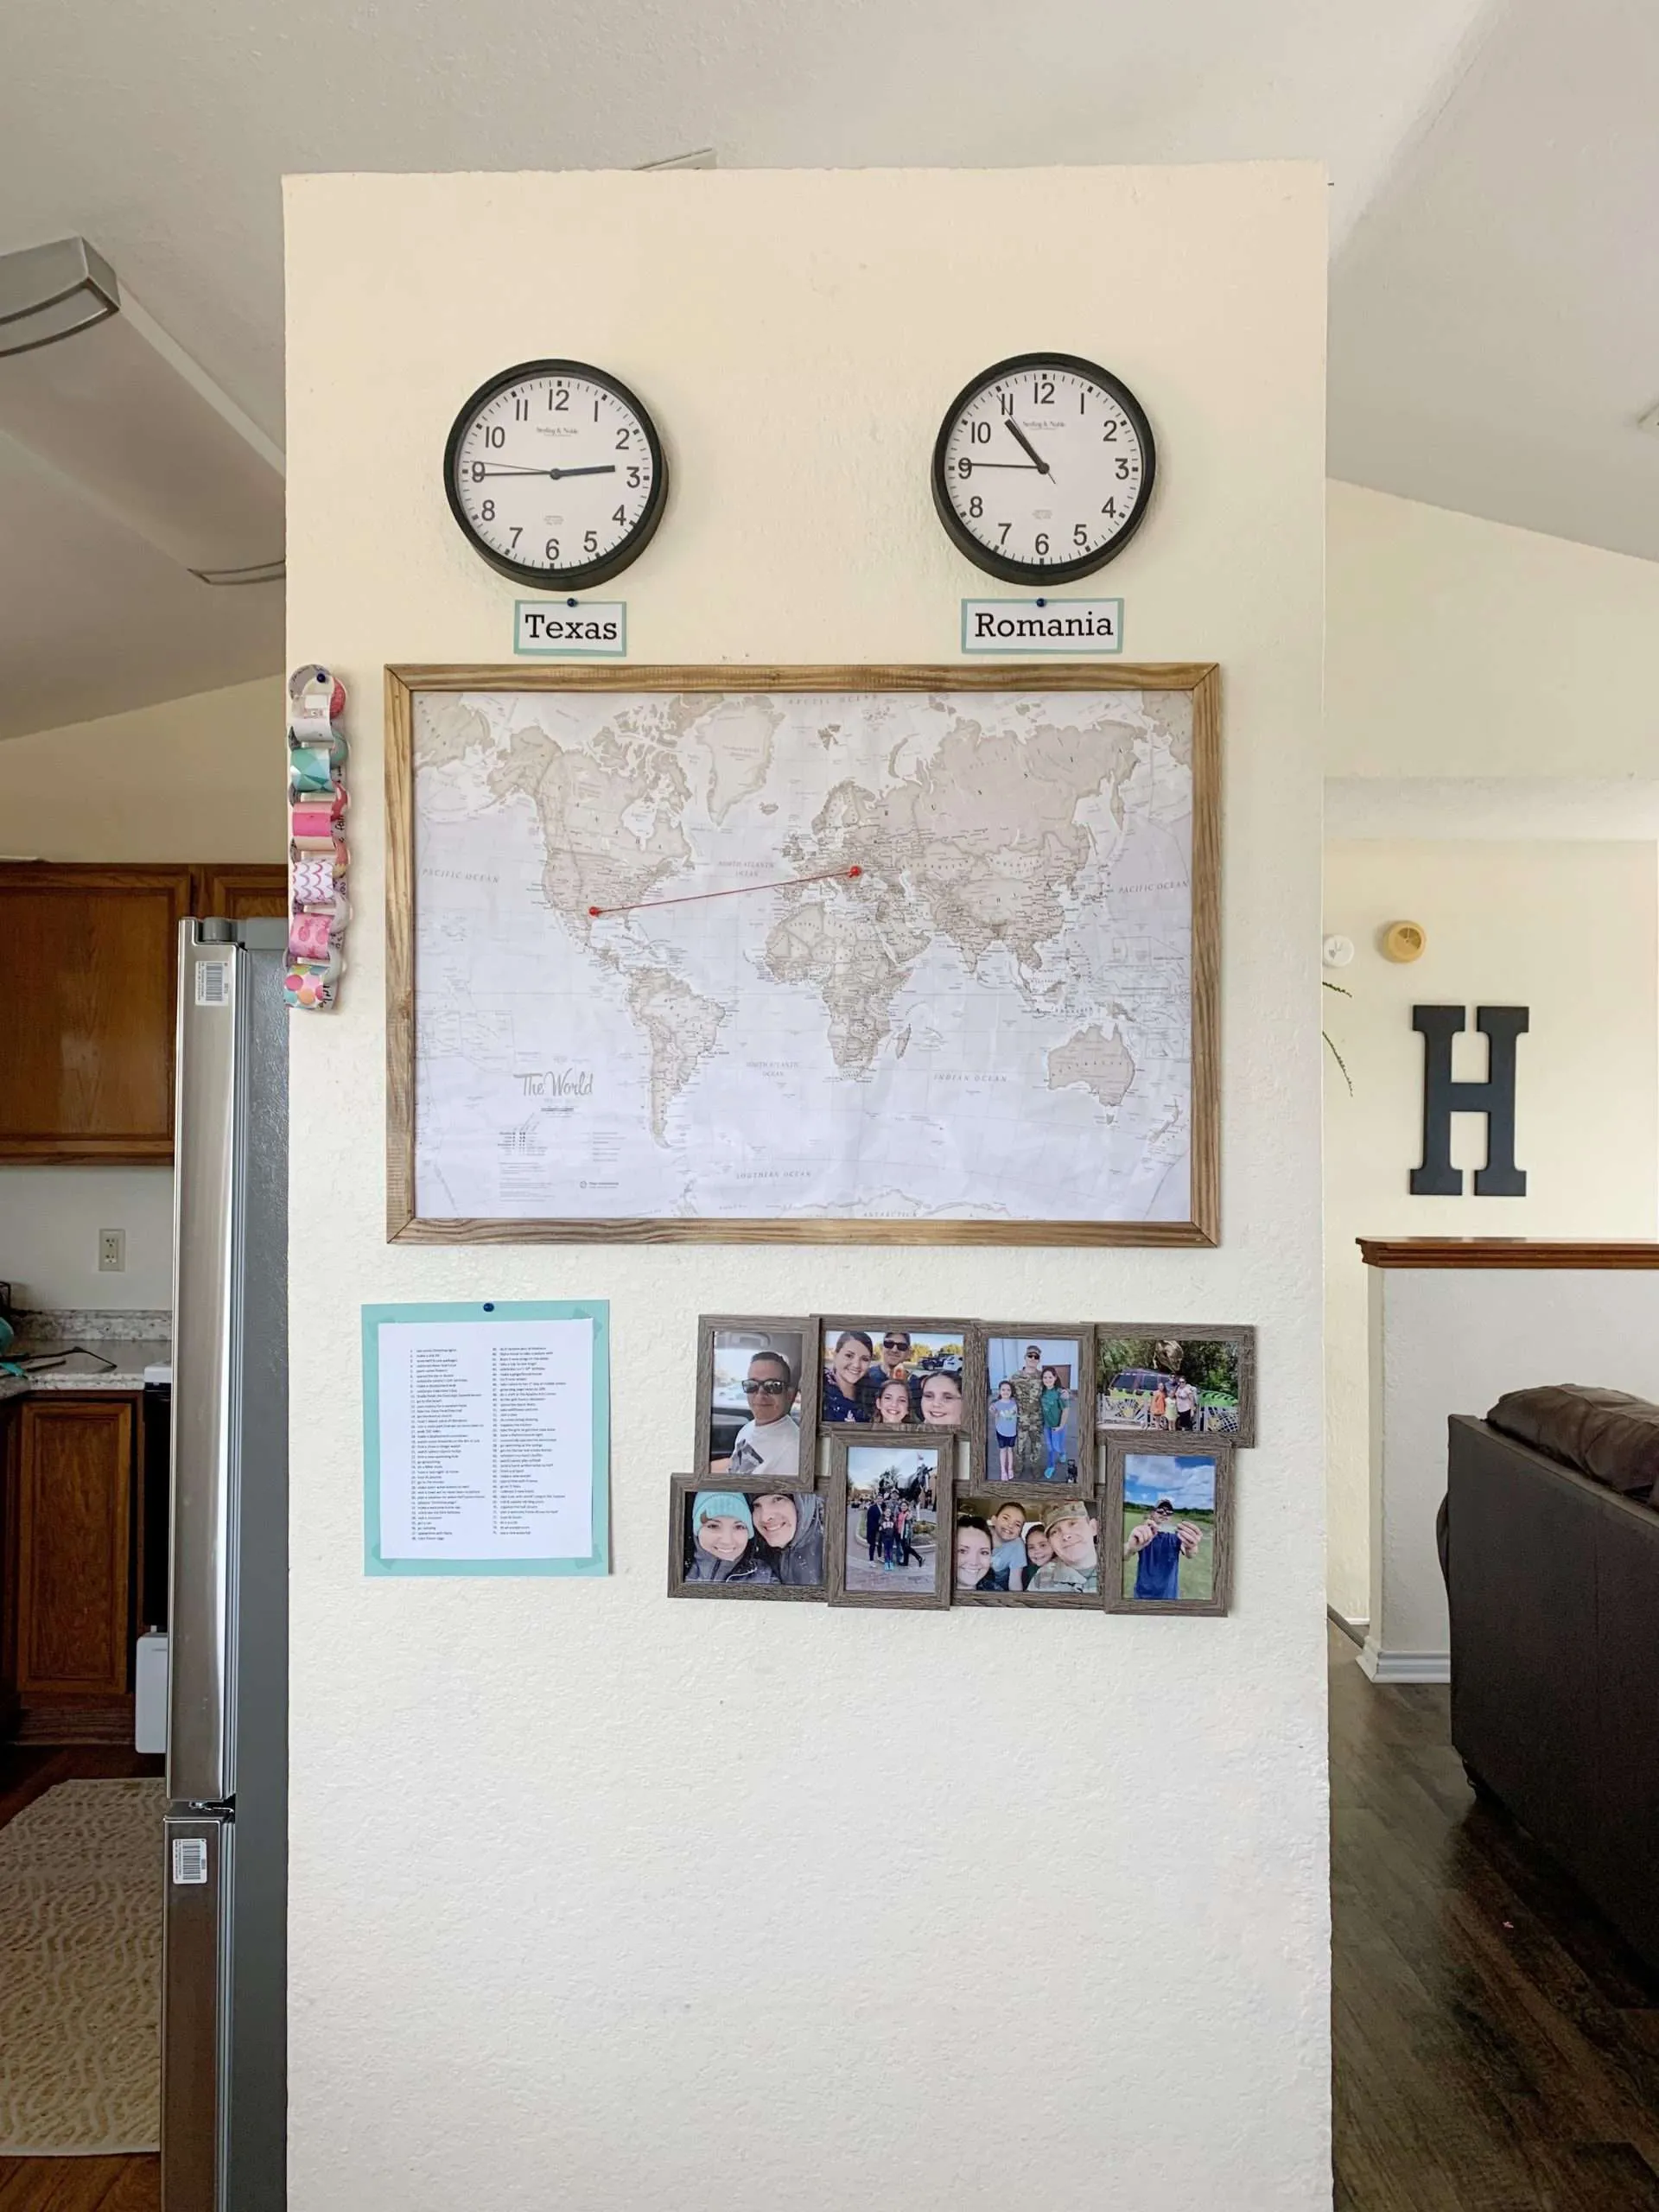 How to Make a Deployment Wall | Finding Mandee